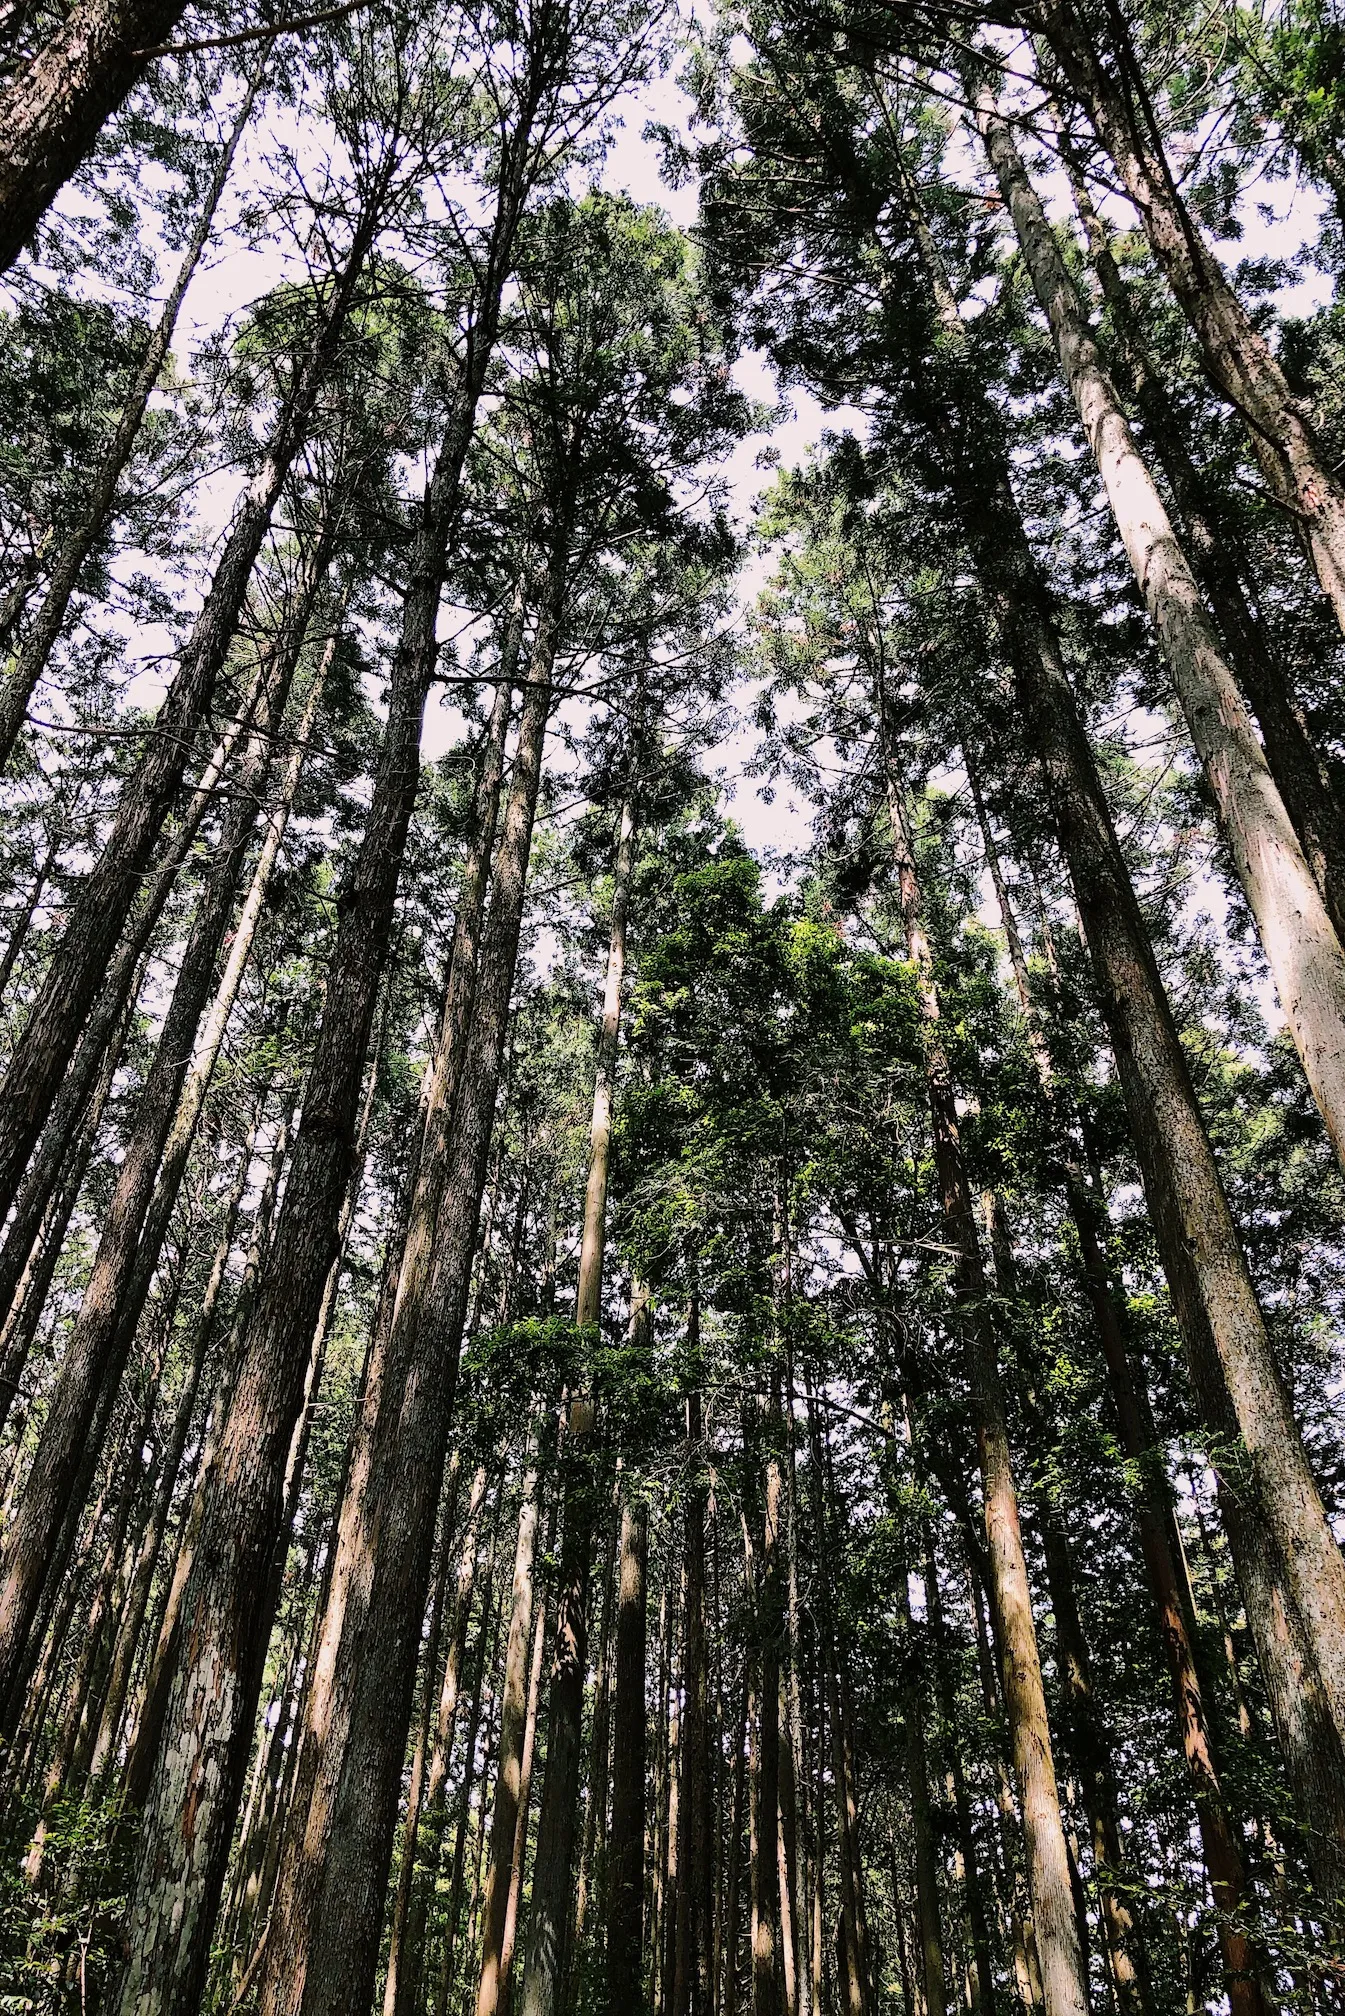 A photograph of monoculture forest in Japan